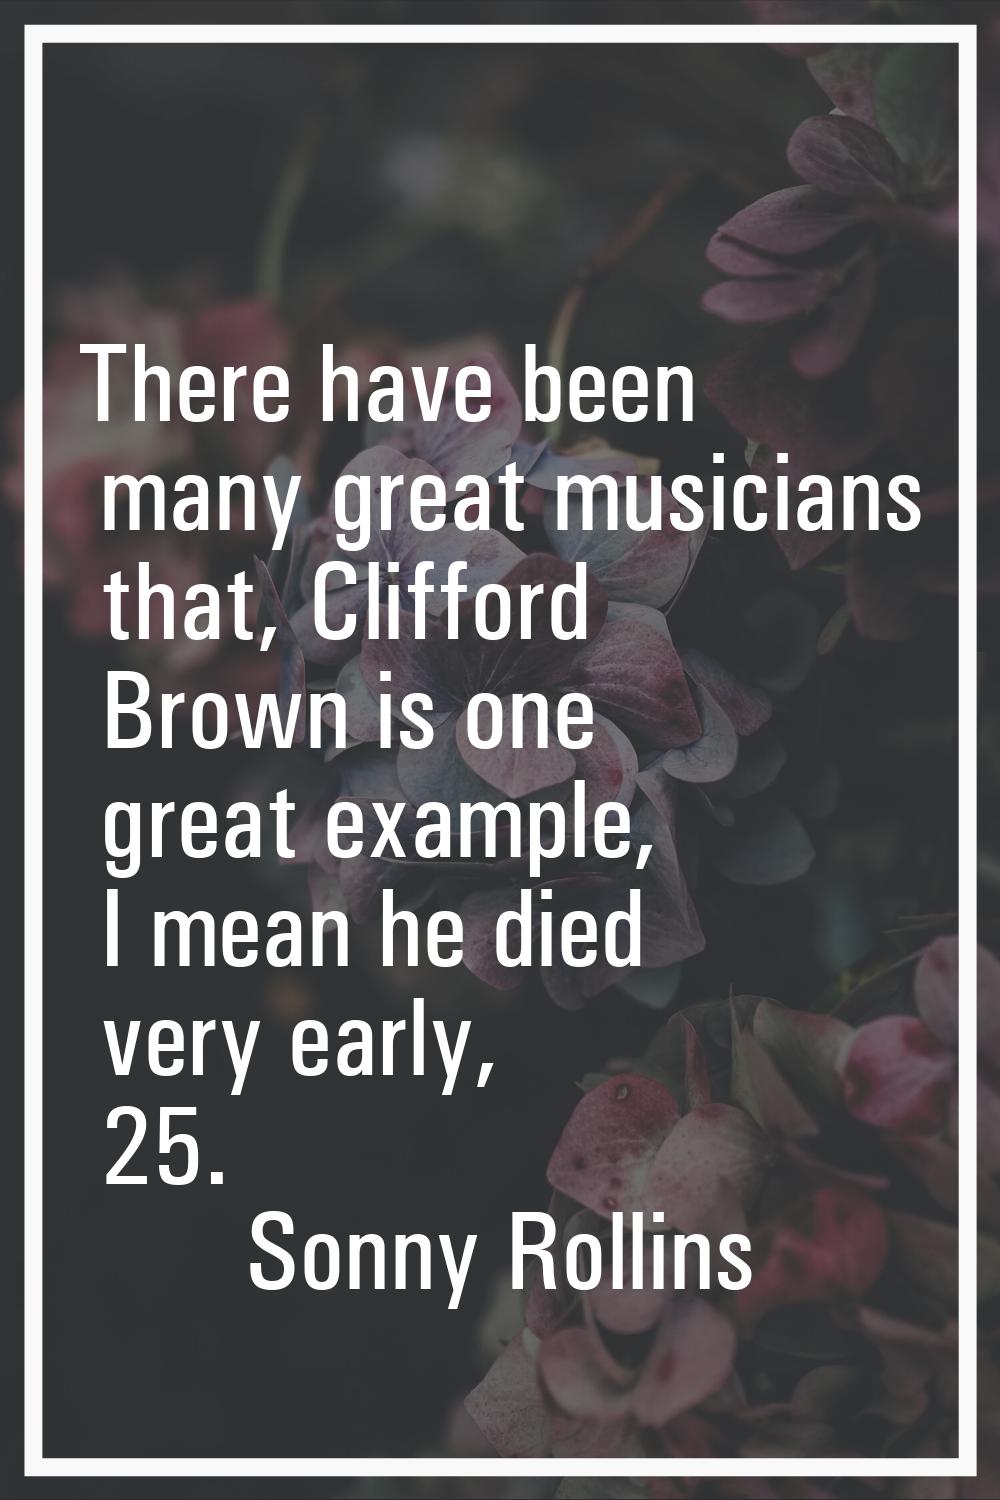 There have been many great musicians that, Clifford Brown is one great example, I mean he died very